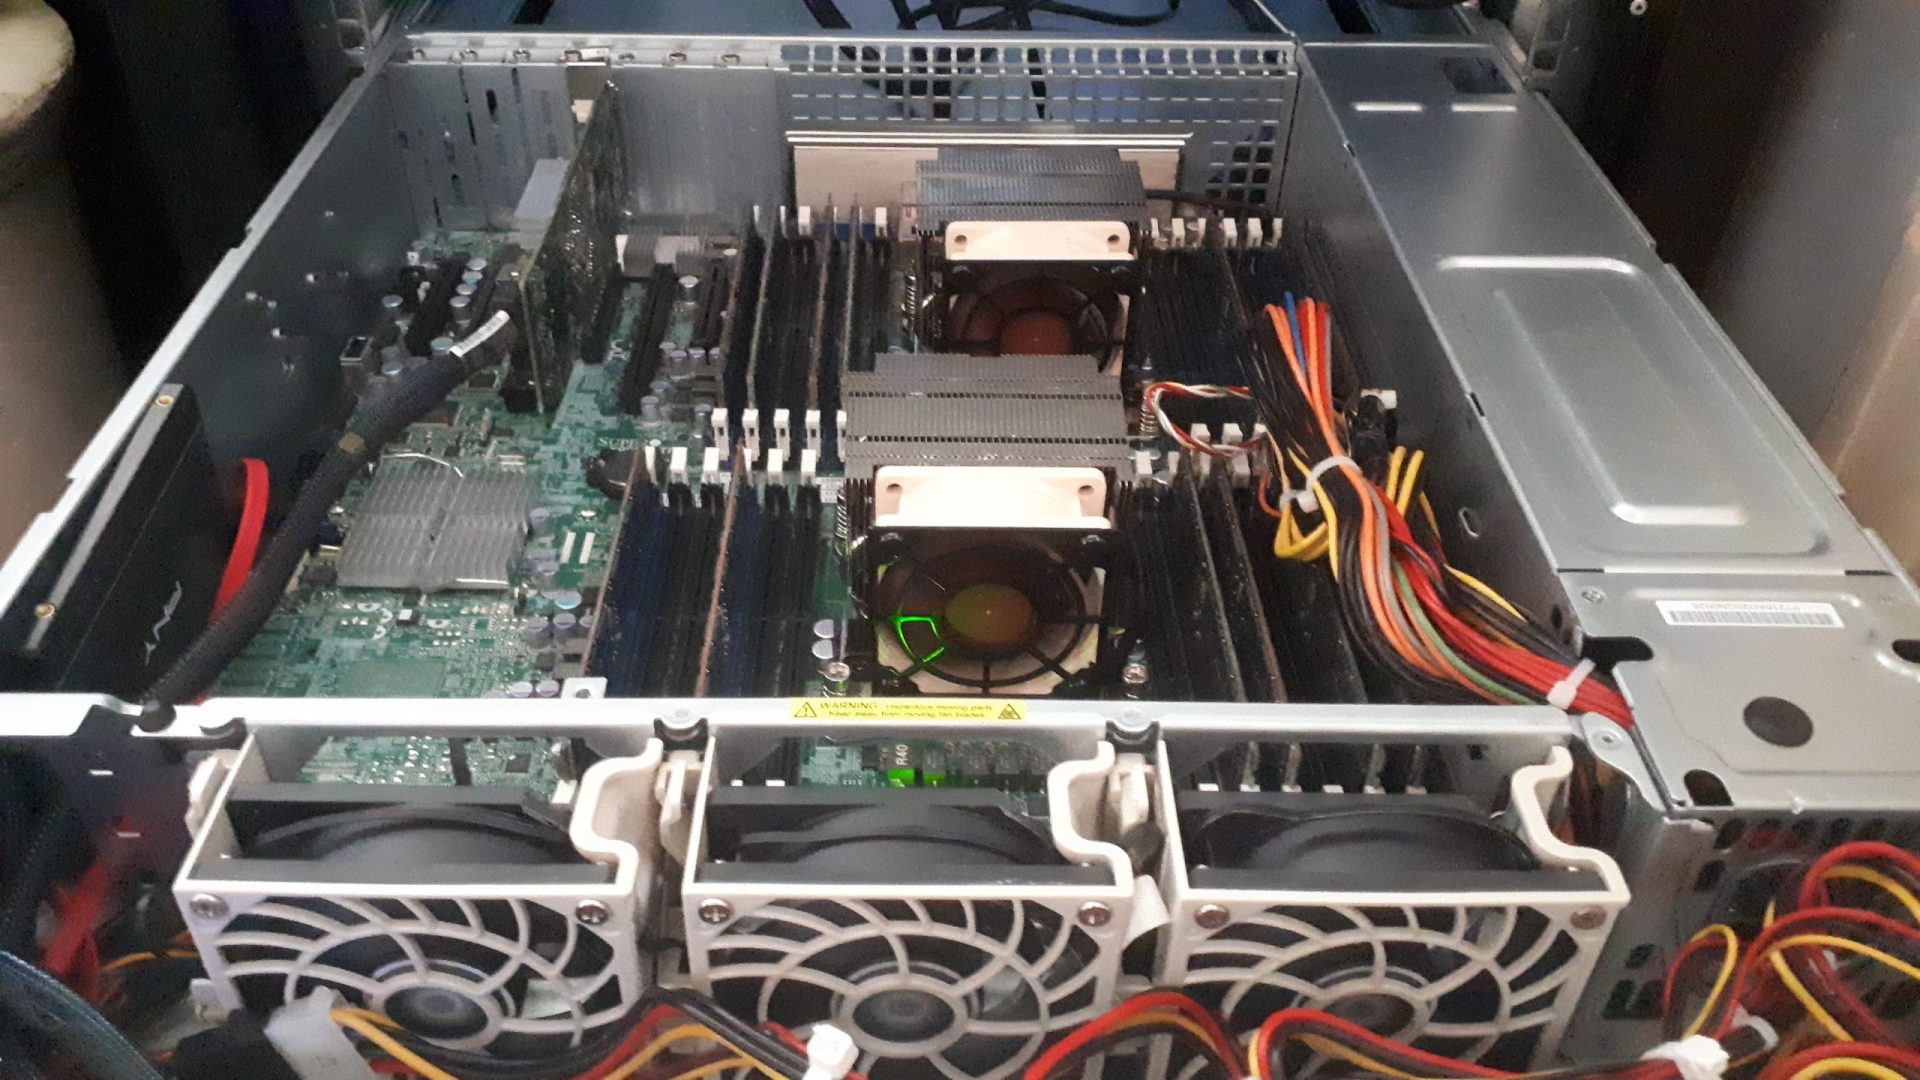 The inside of my Supermicro CSE-216